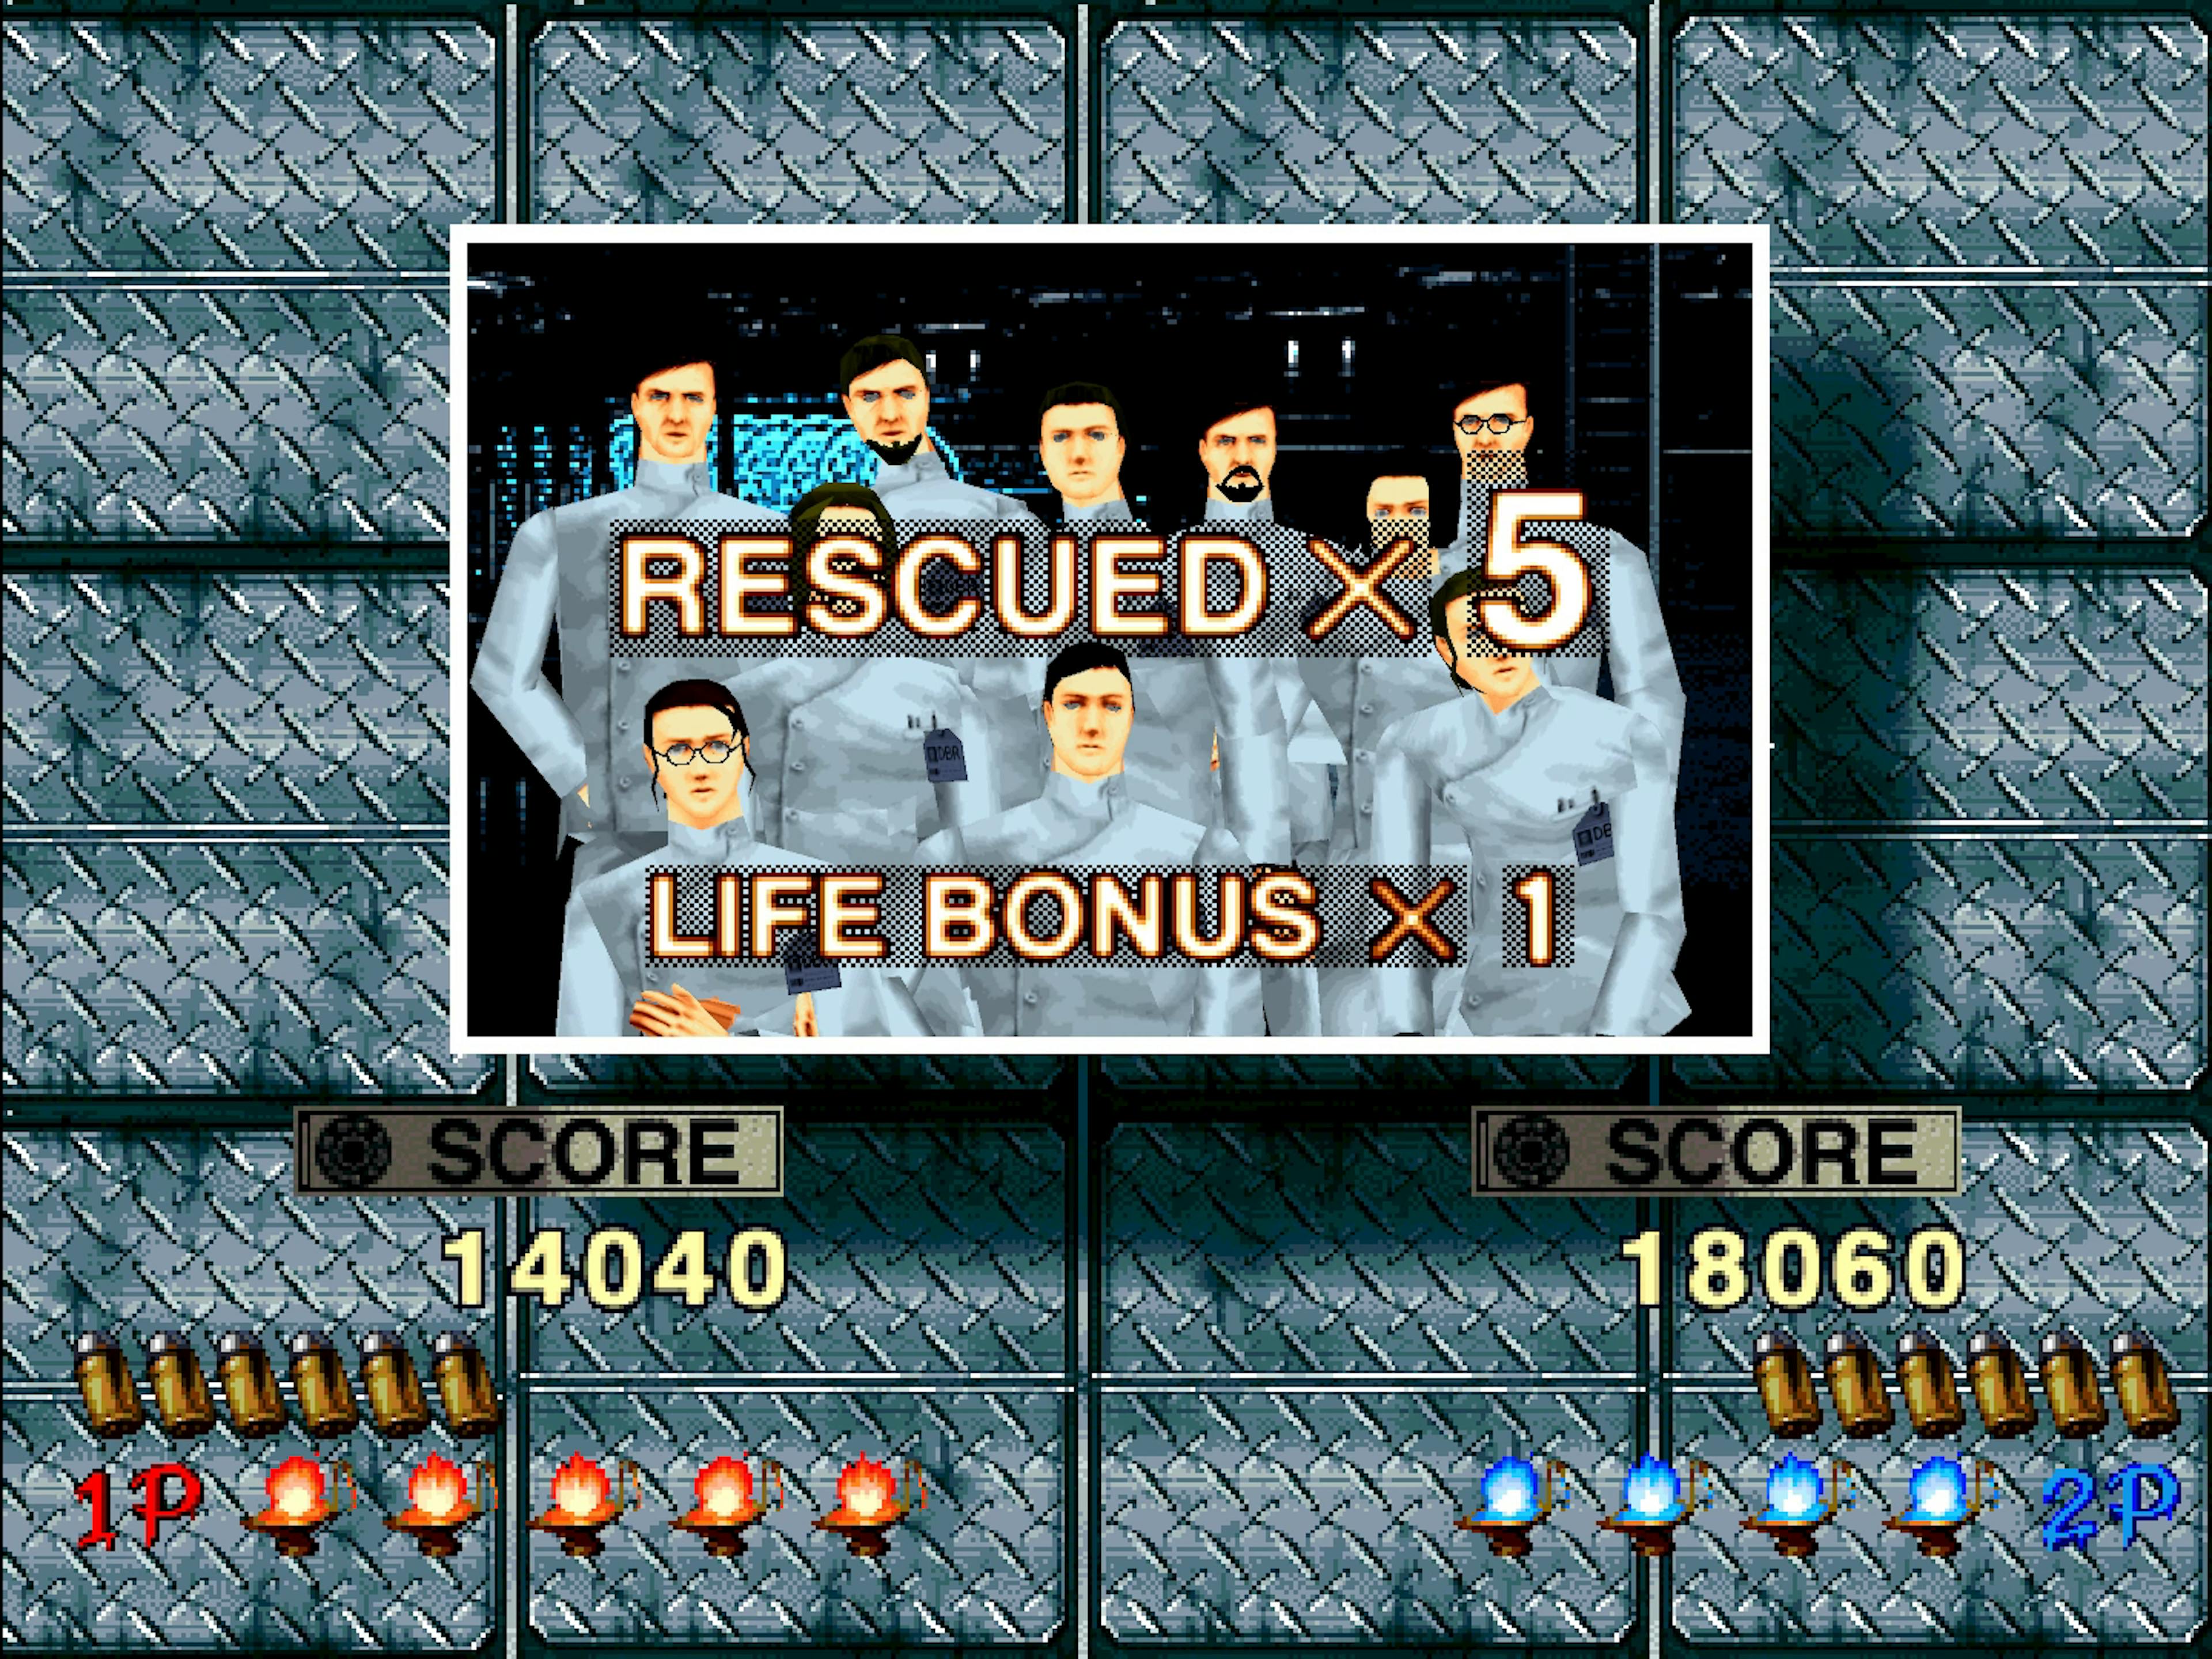 Everyone's been rescued and I get an extra life per player for my efforts - but is it enough to save Sophie?